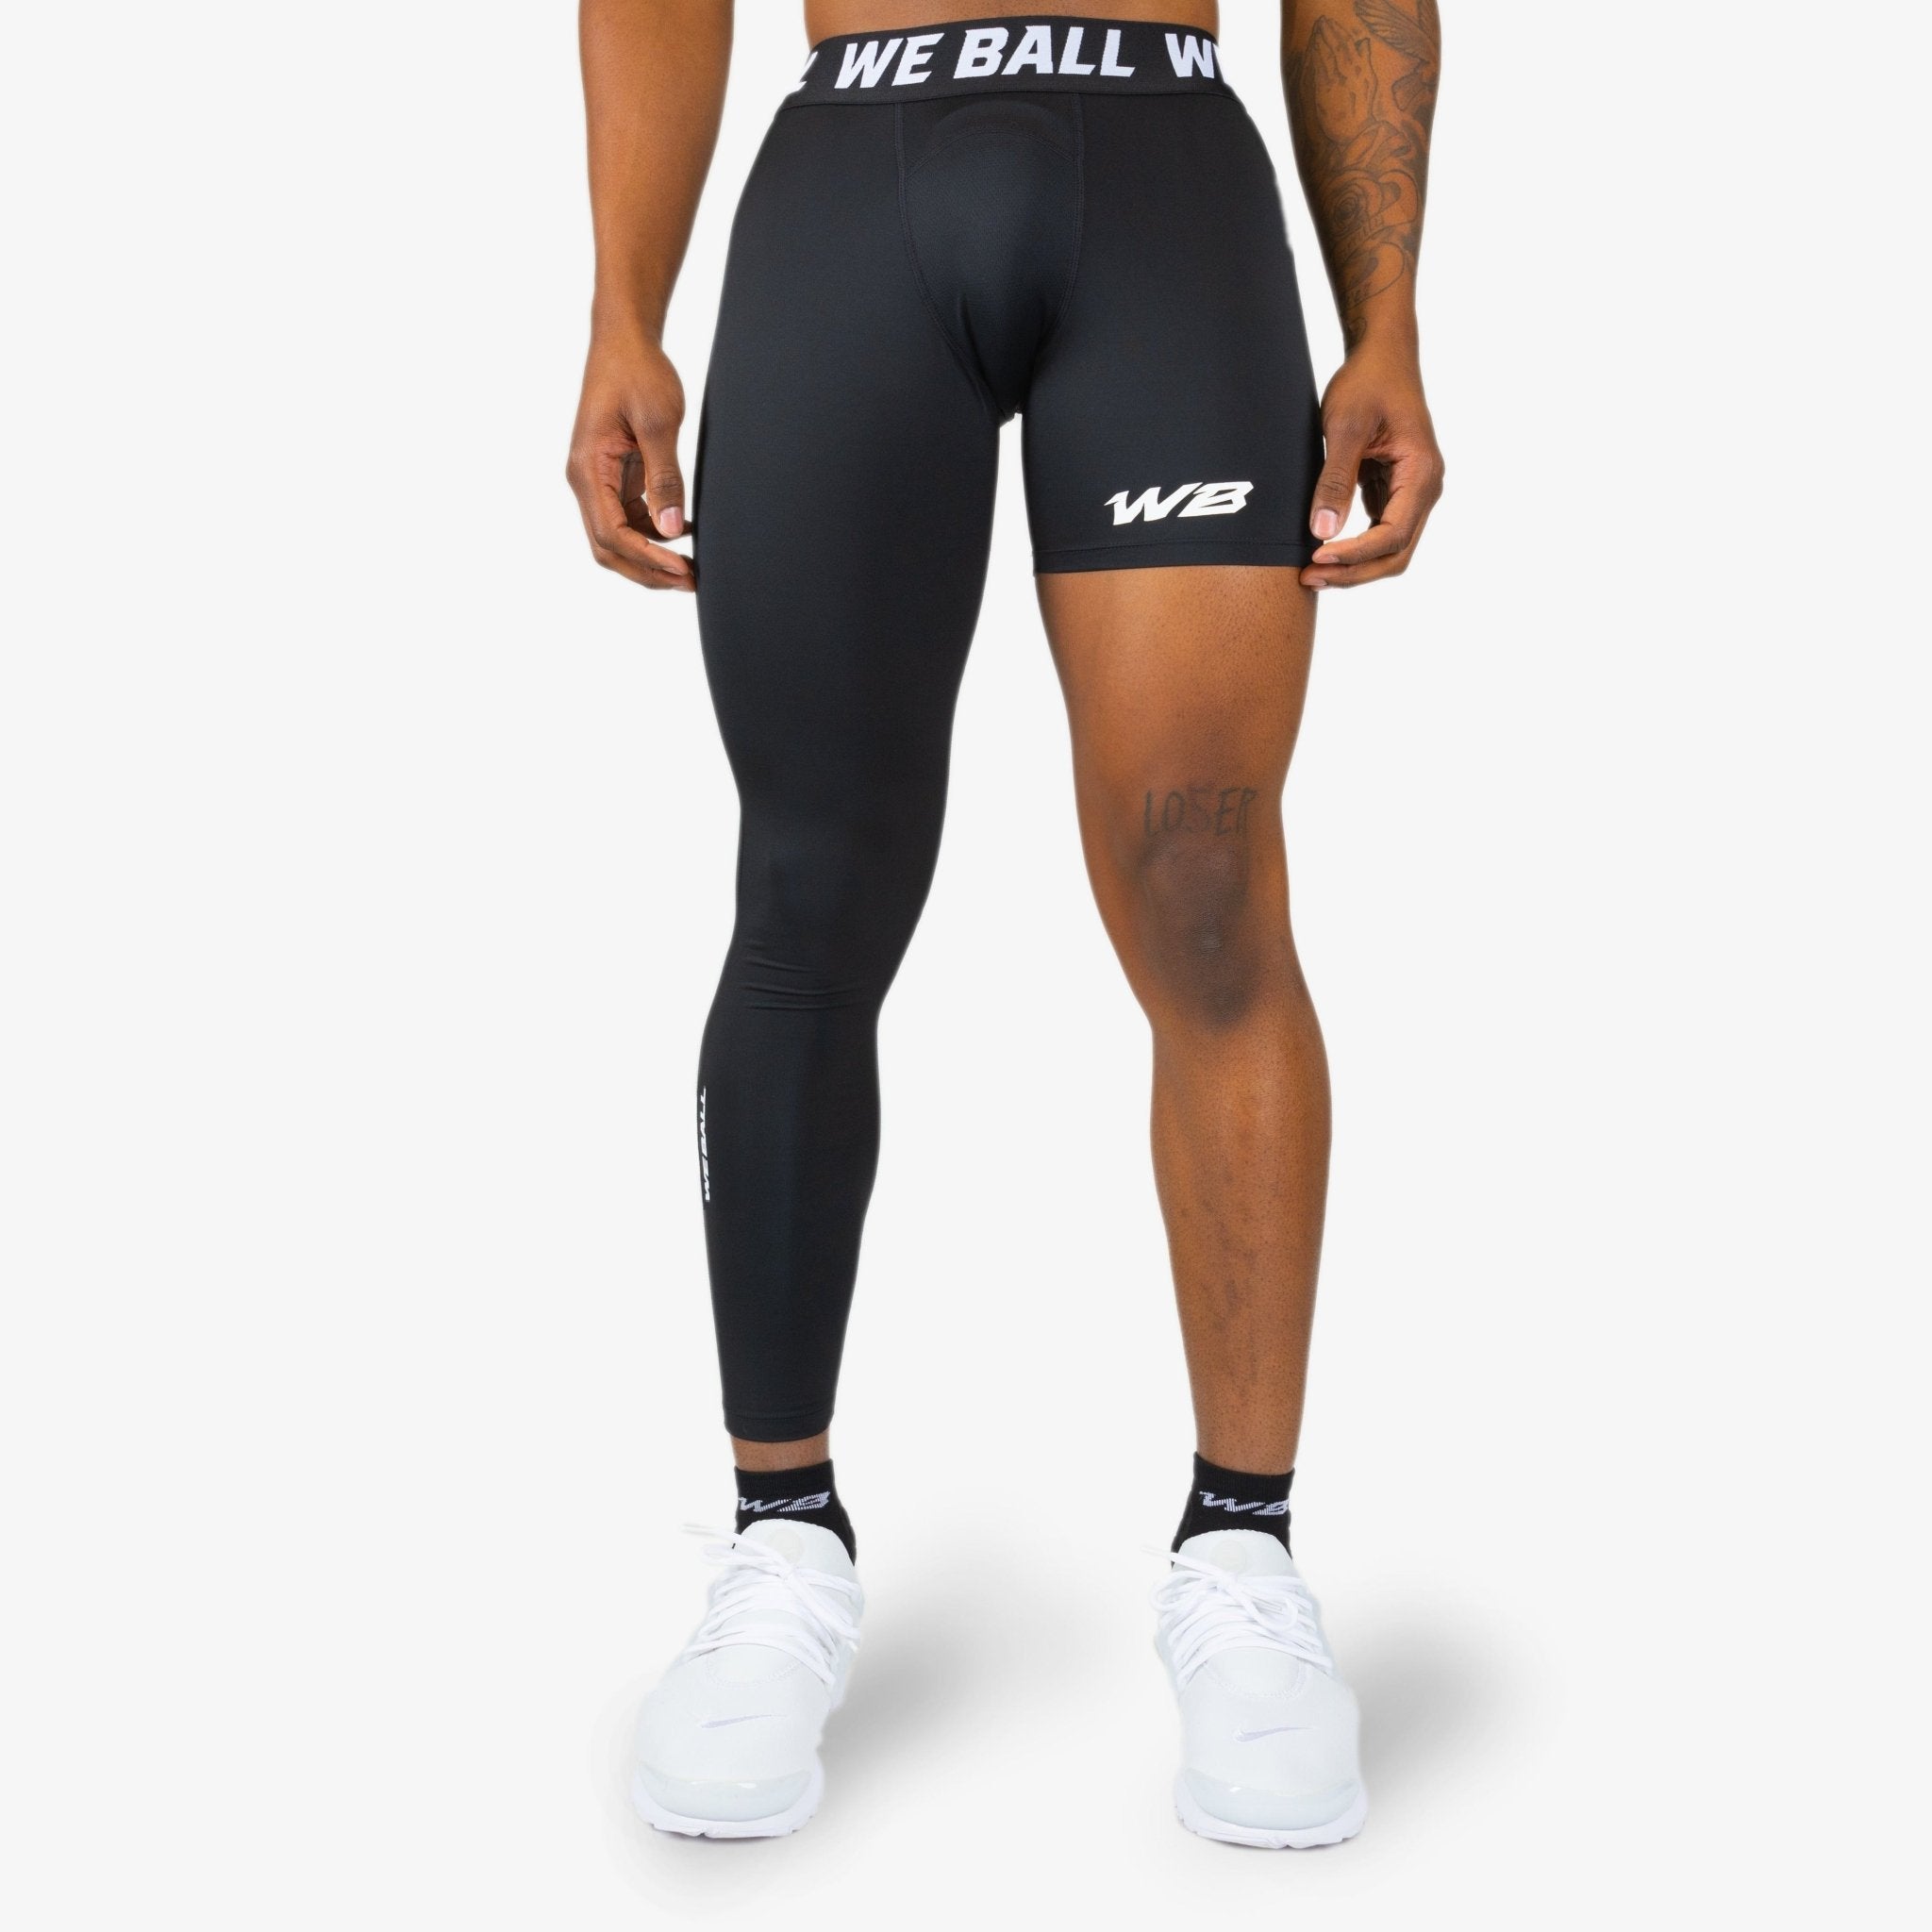 Affordable Compression Gear To Help Your Workouts | Men's Health